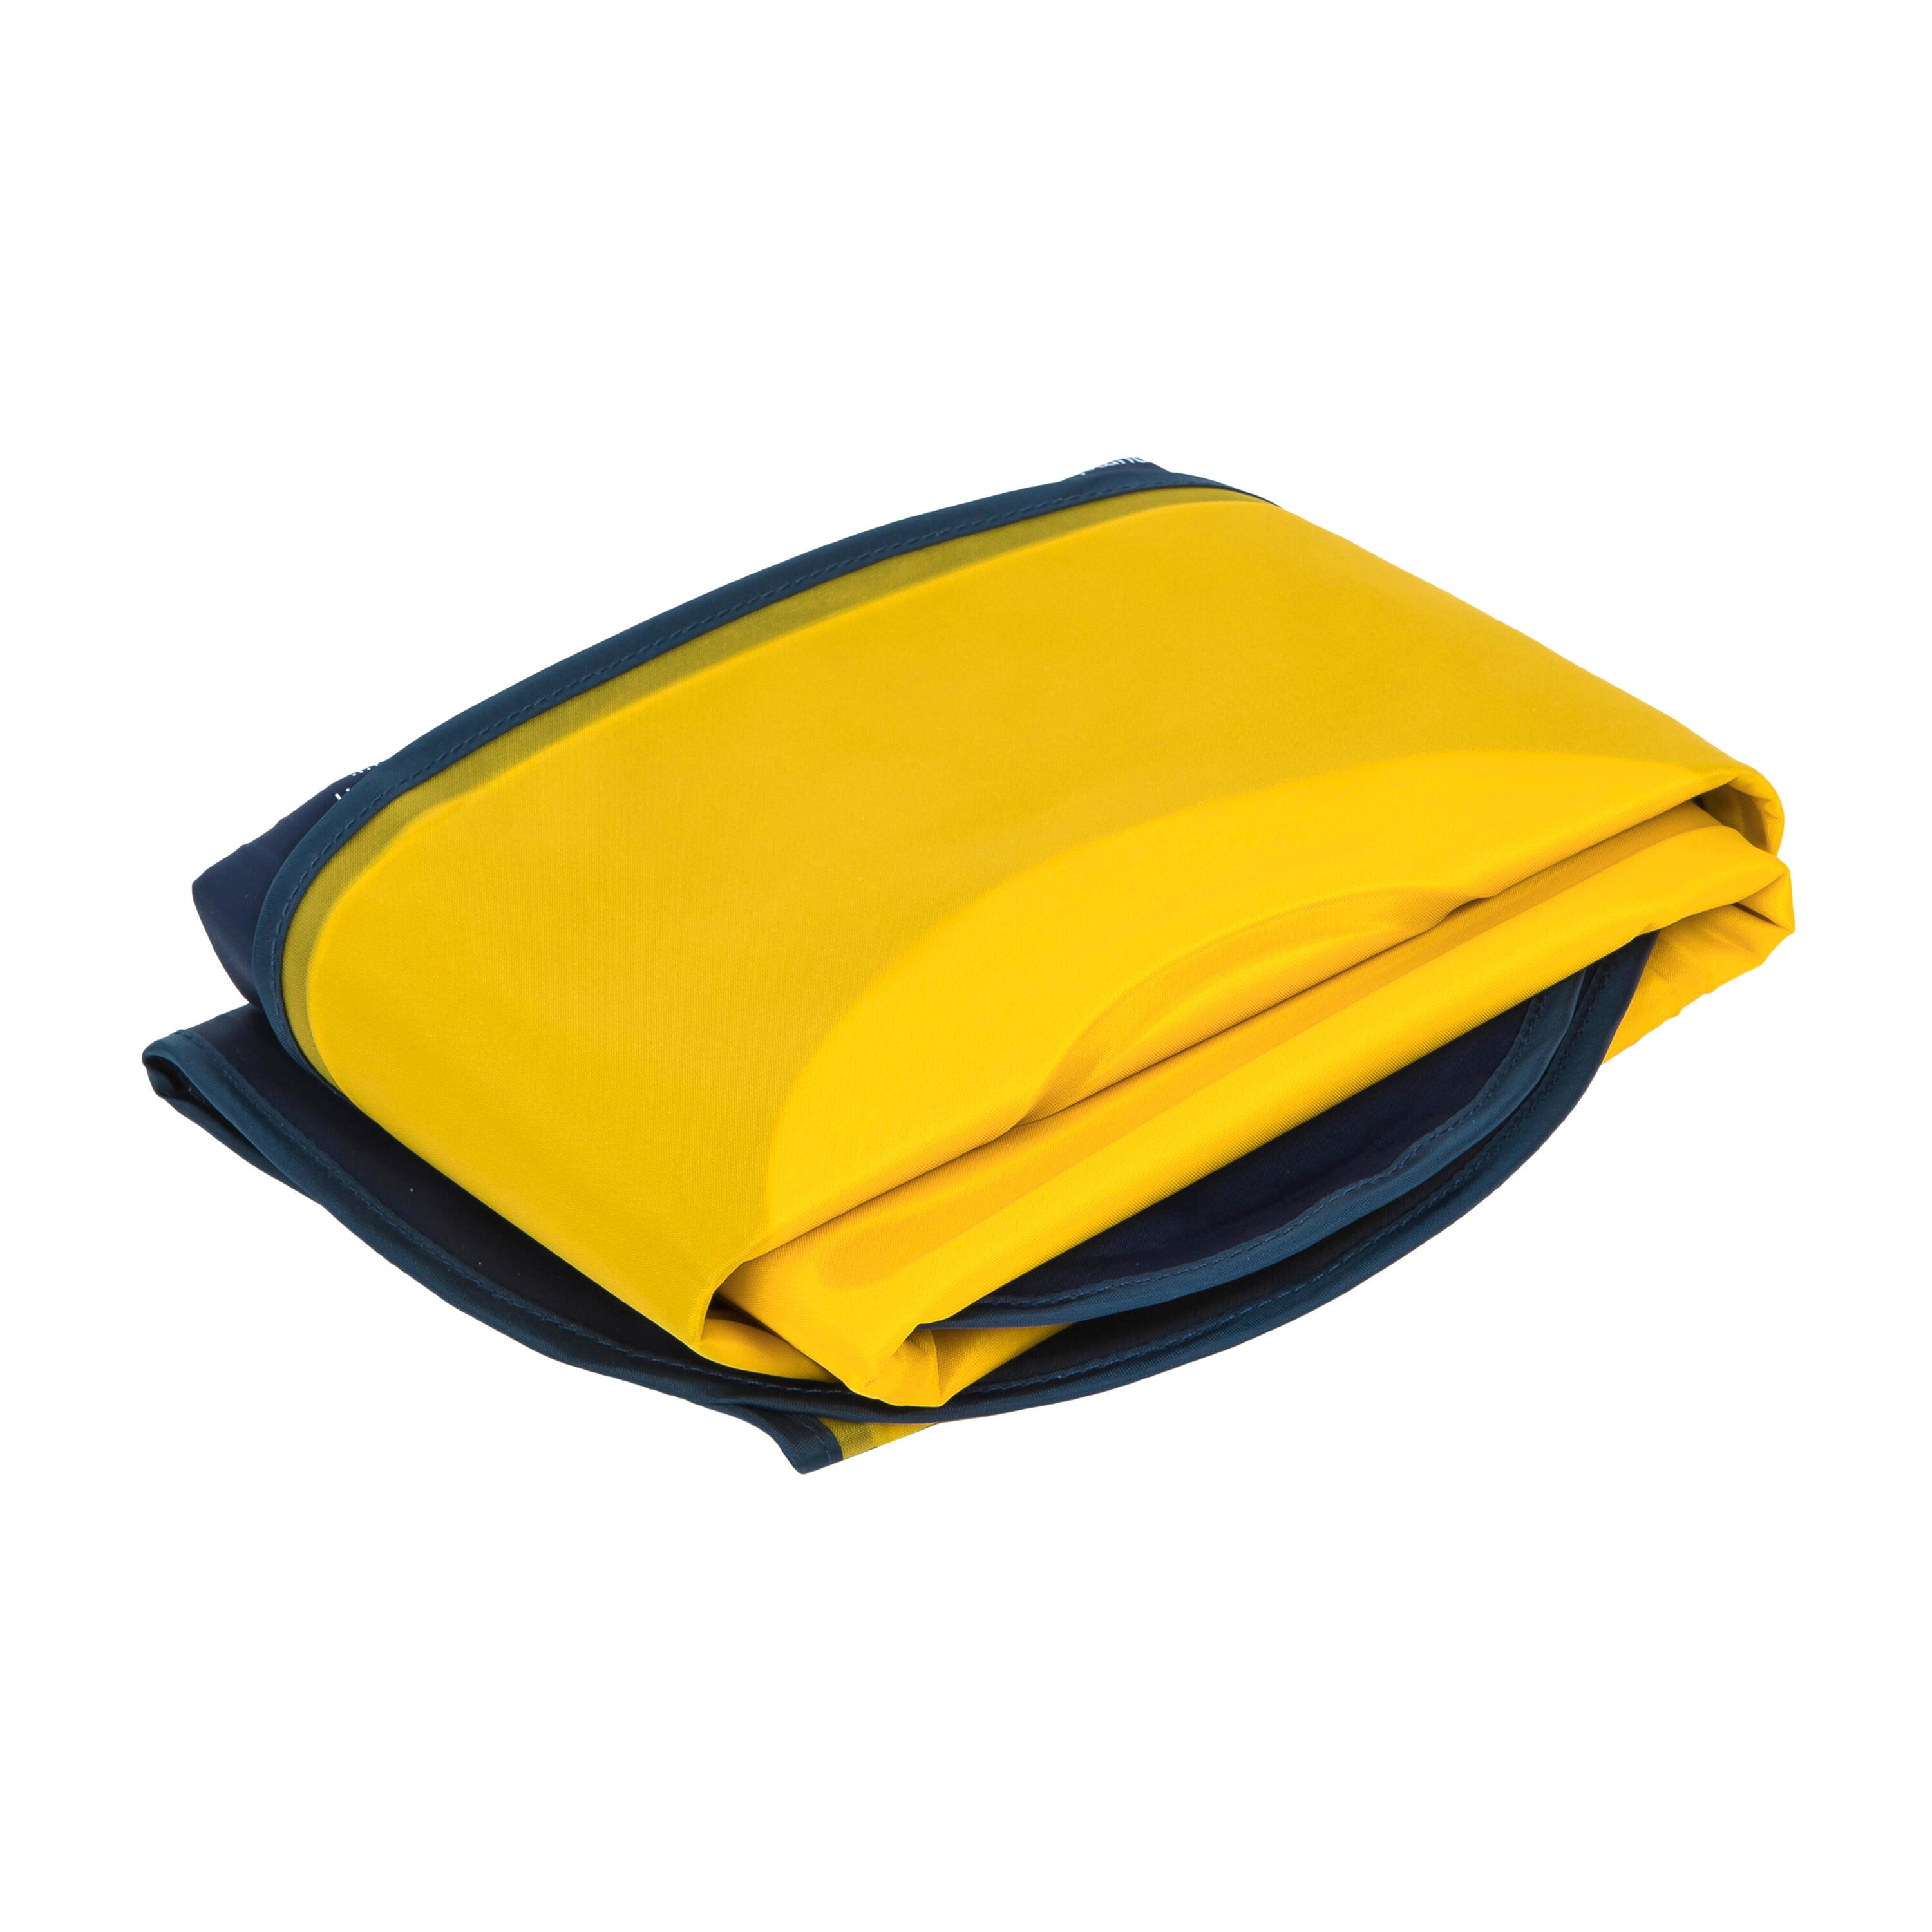 Kids' Discovery Inflatable Bodyboard - Yellow 4-8 years (15-25 kg) 8/12